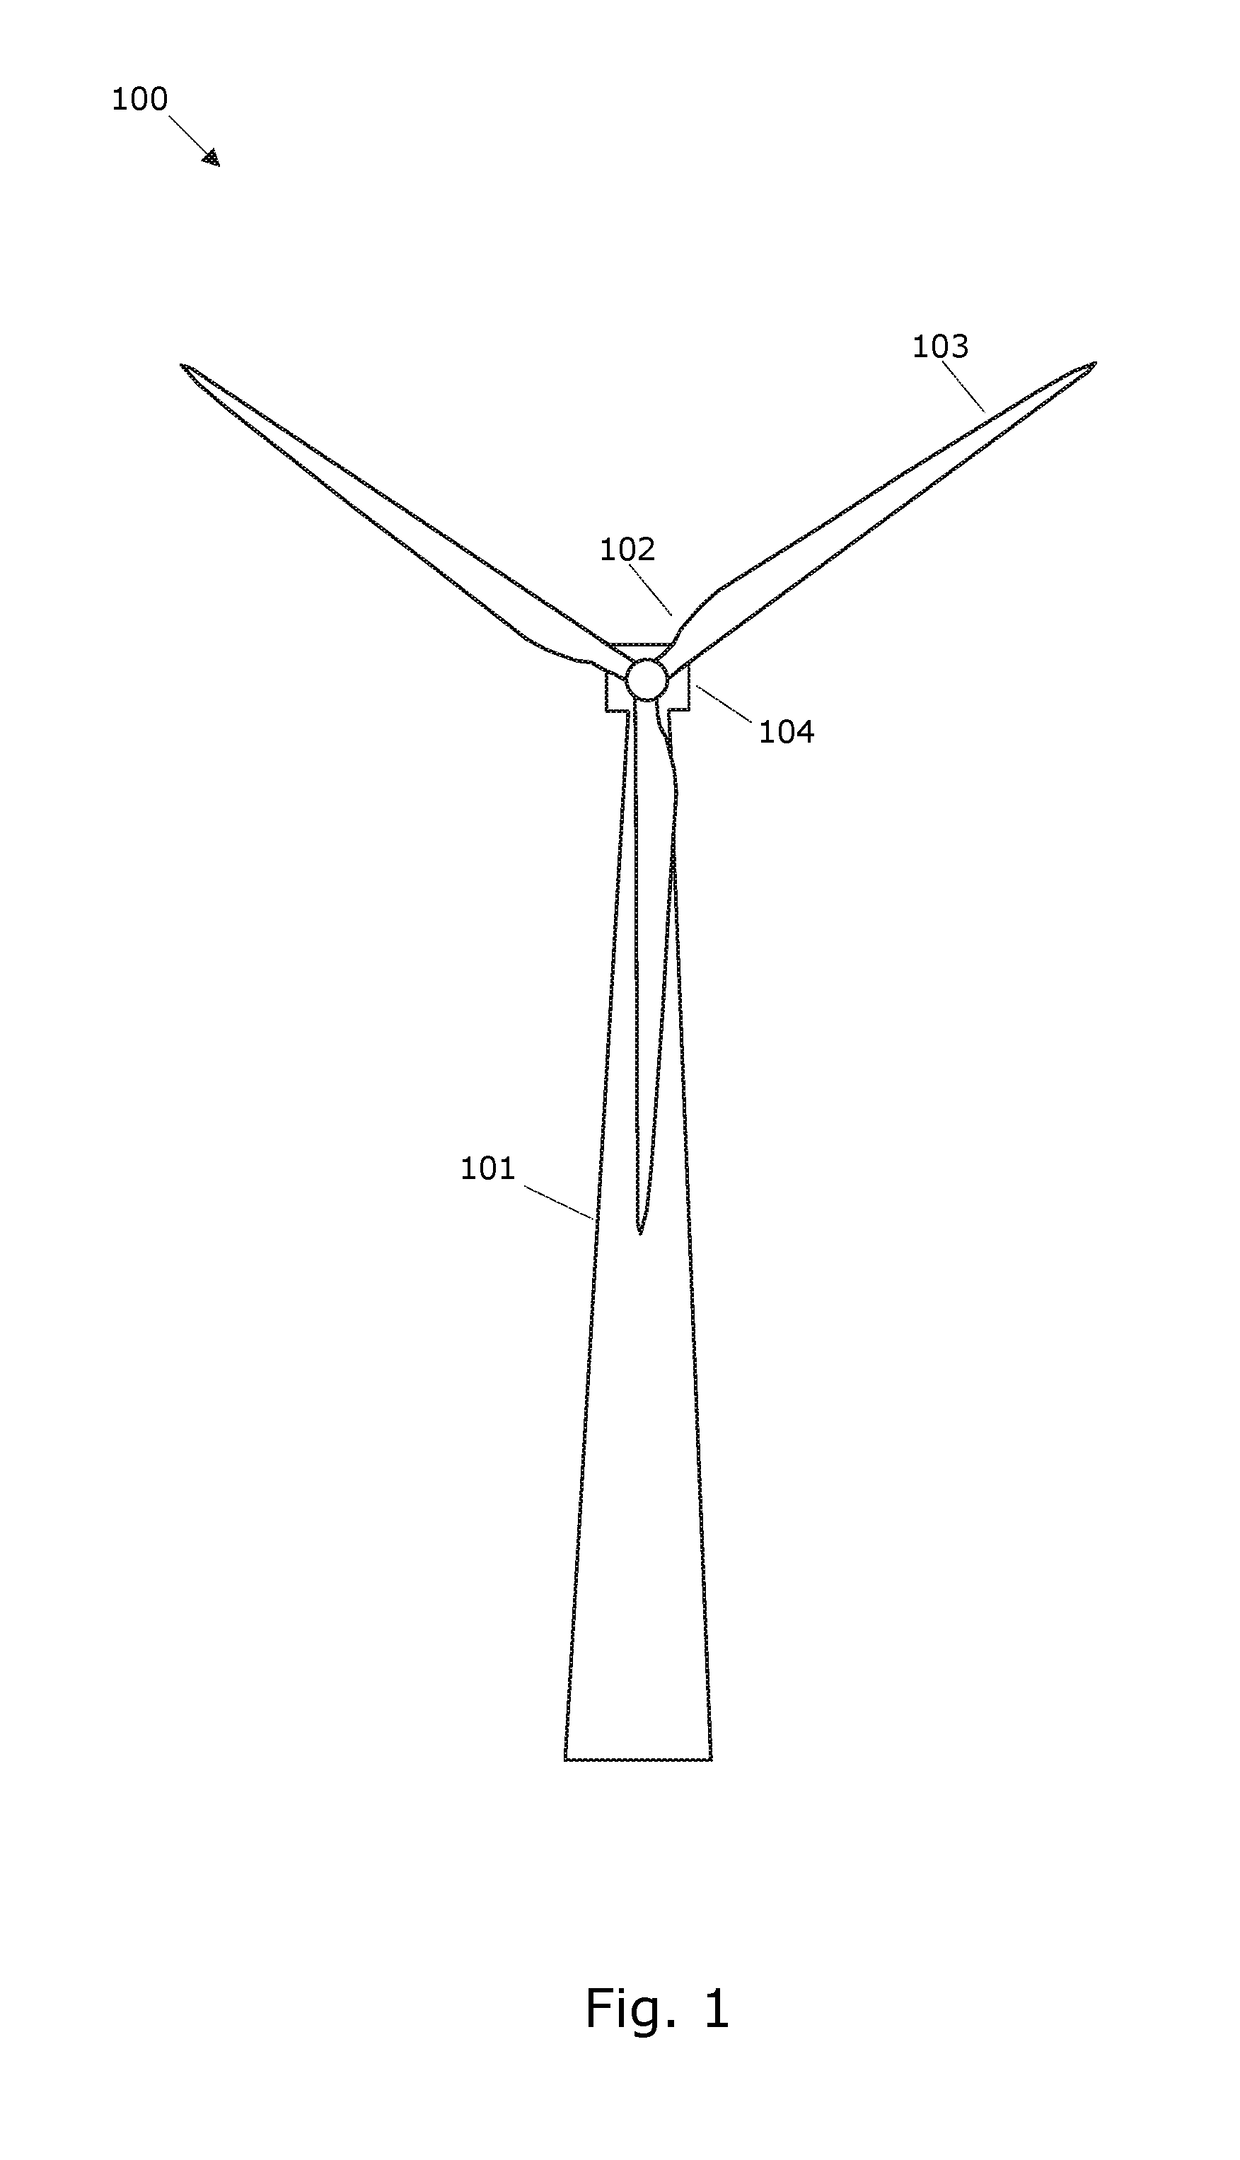 Ramping power in a wind turbine dependent on an estimated available wind power